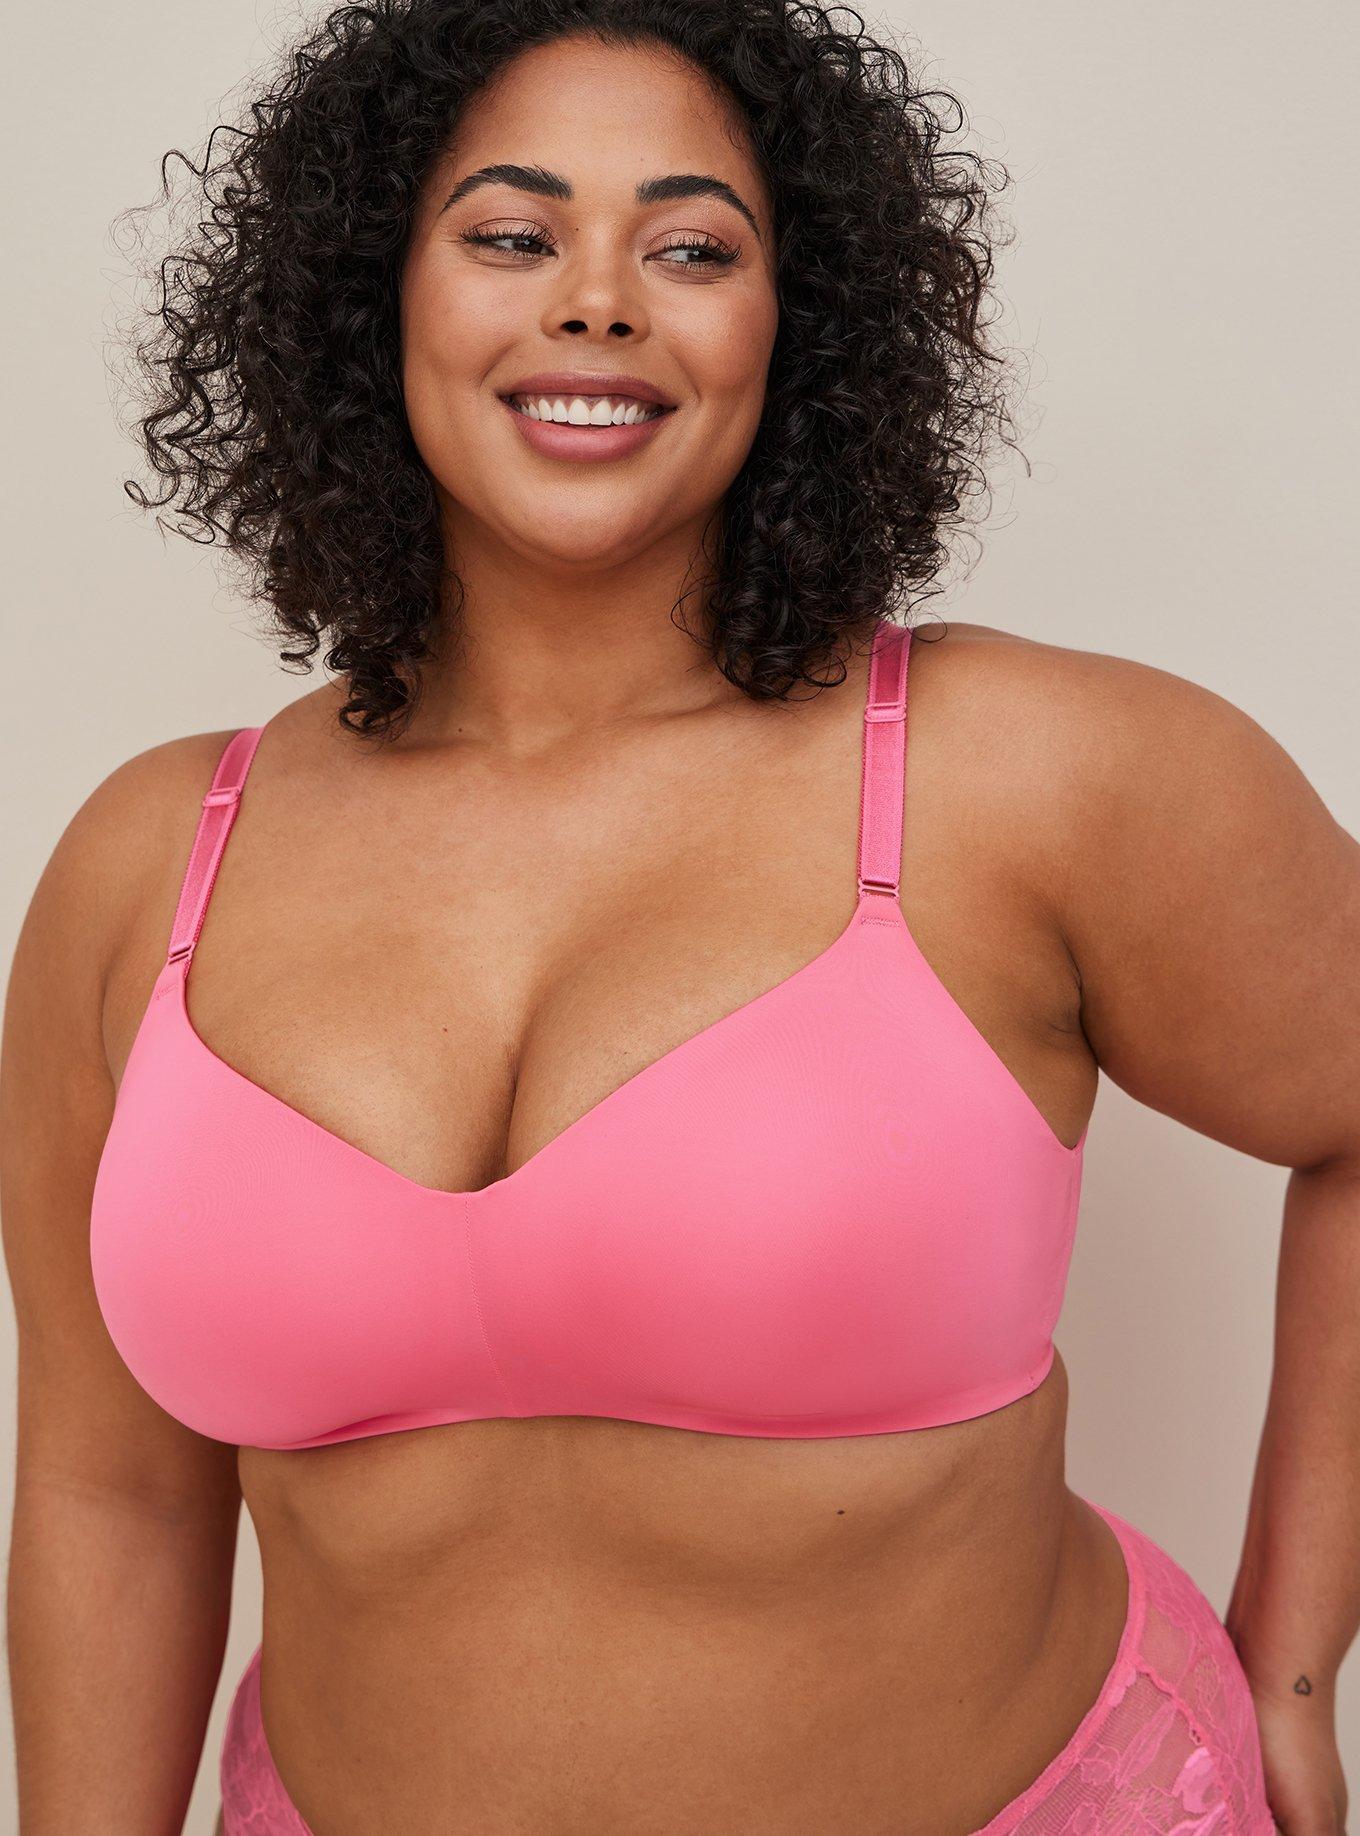 Torrid - Meet the Everyday Wire-Free Bra. The most comfortable bra